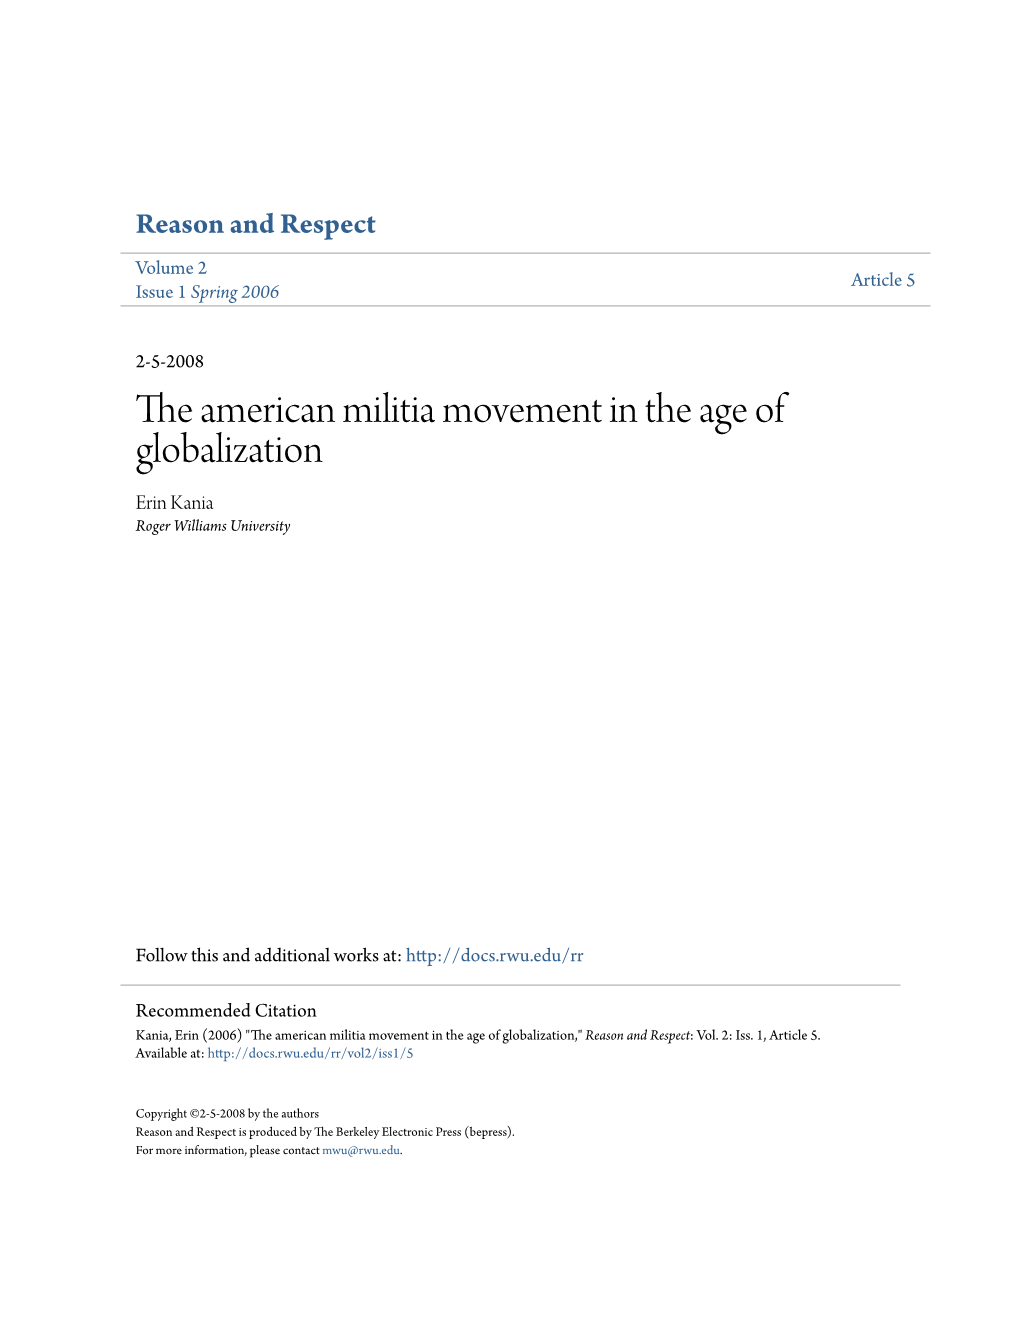 The American Militia Movement in the Age of Globalization